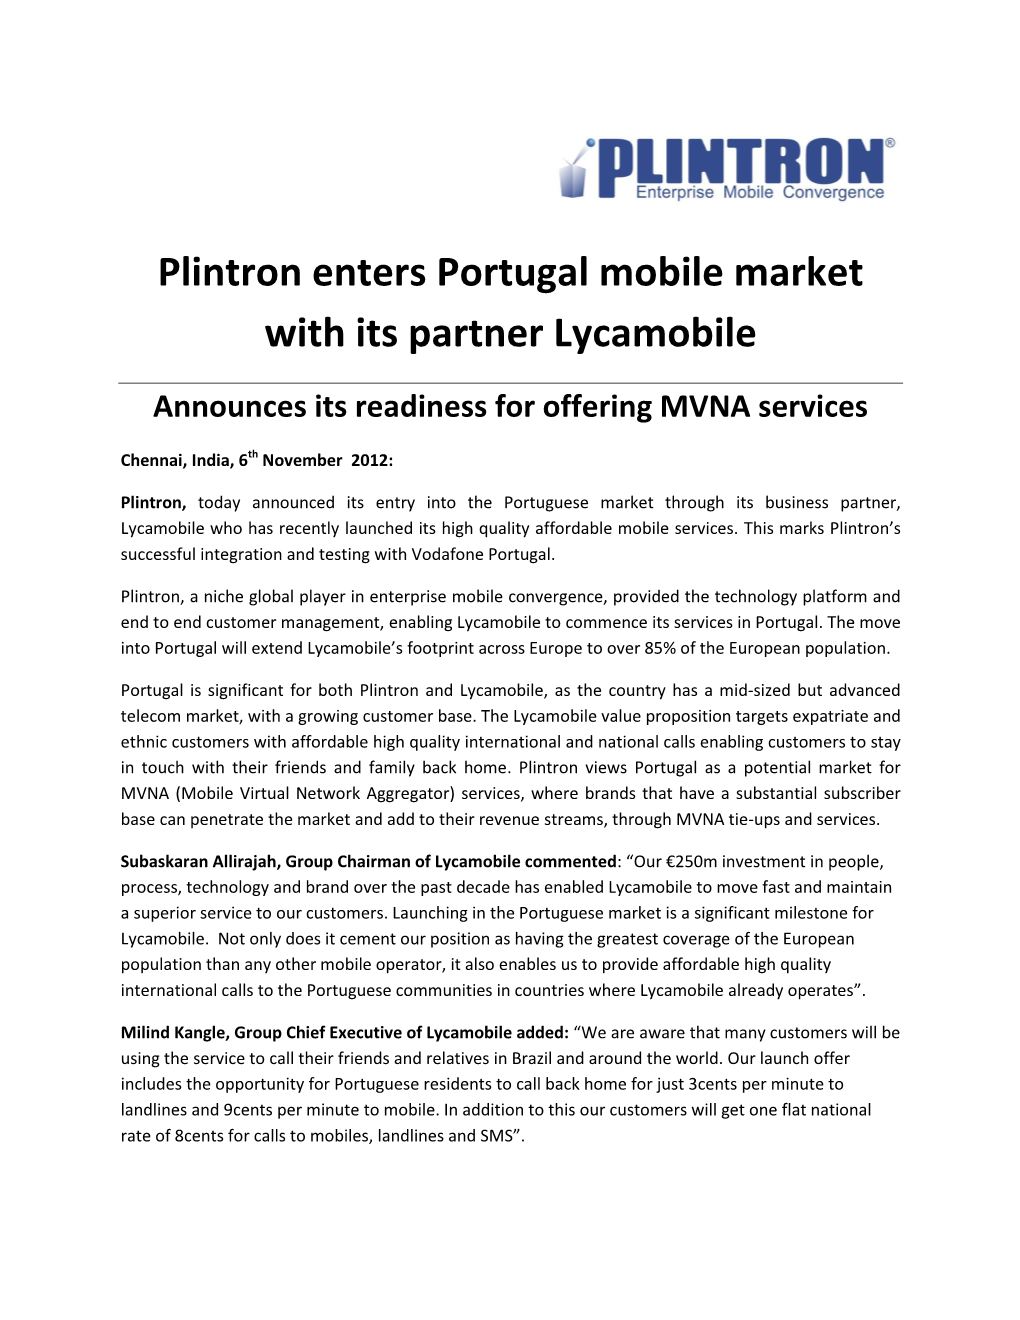 Plintron Enters Portugal Mobile Market with Its Partner Lycamobile